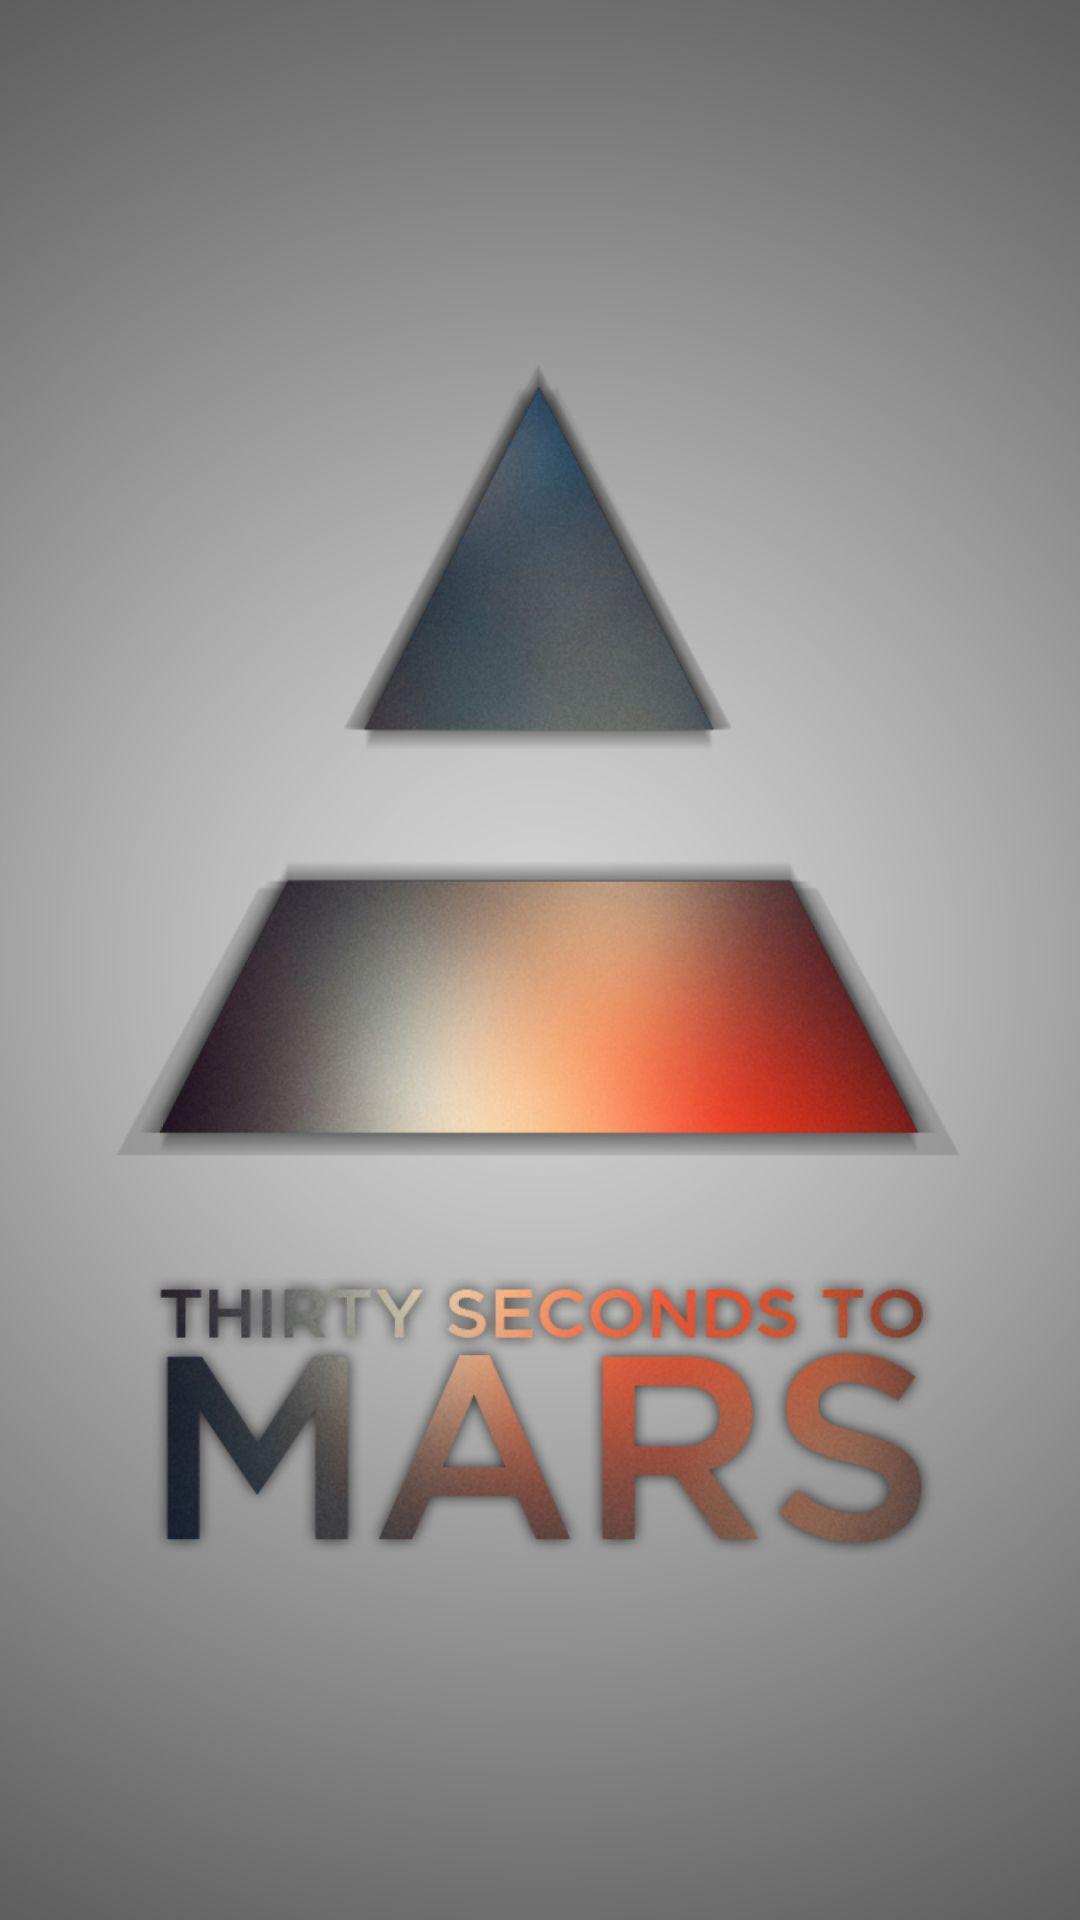 30 Seconds to Mars Logo - Thirty Seconds To Mars Wallpaper